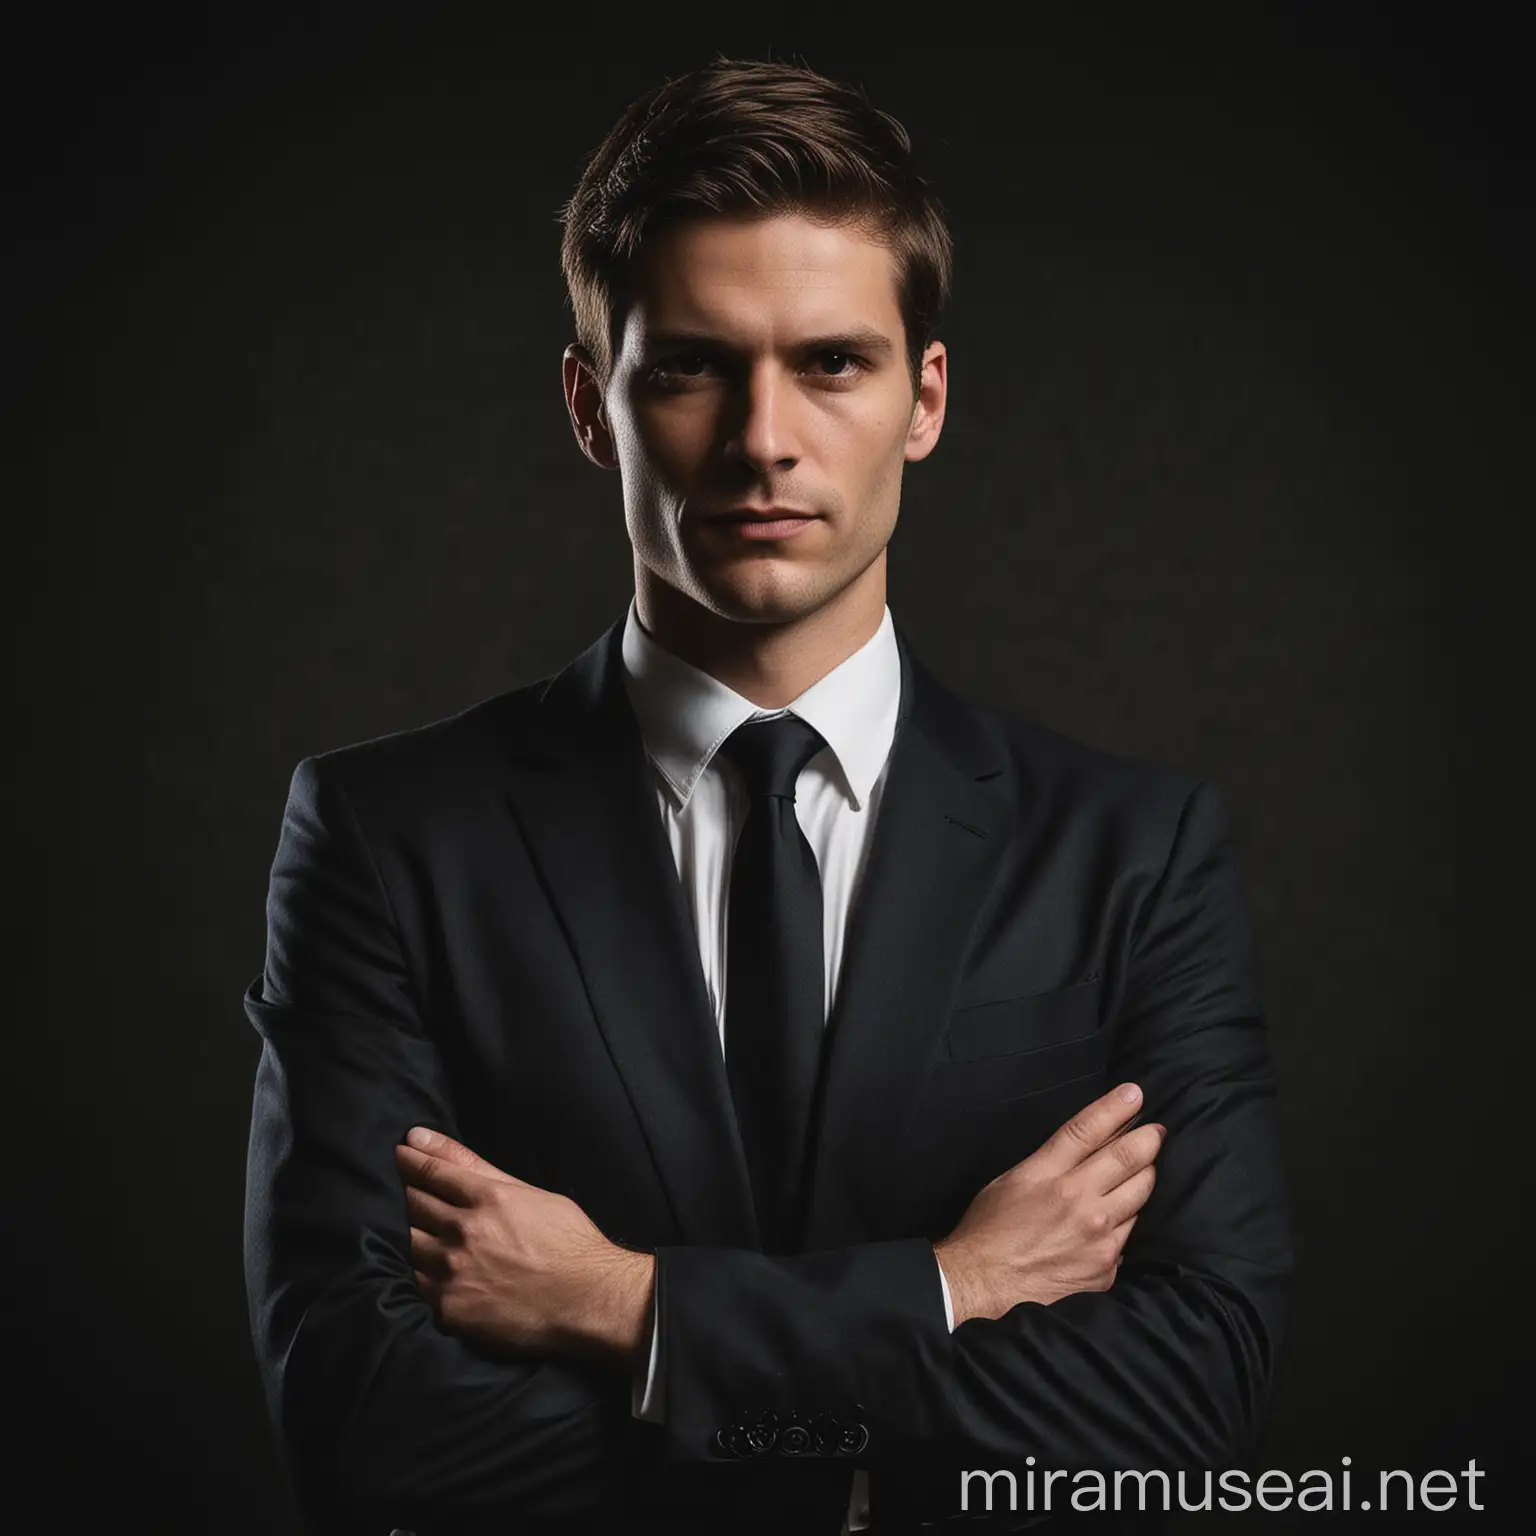 Confident Explainer Man in Suit with Crossed Arms